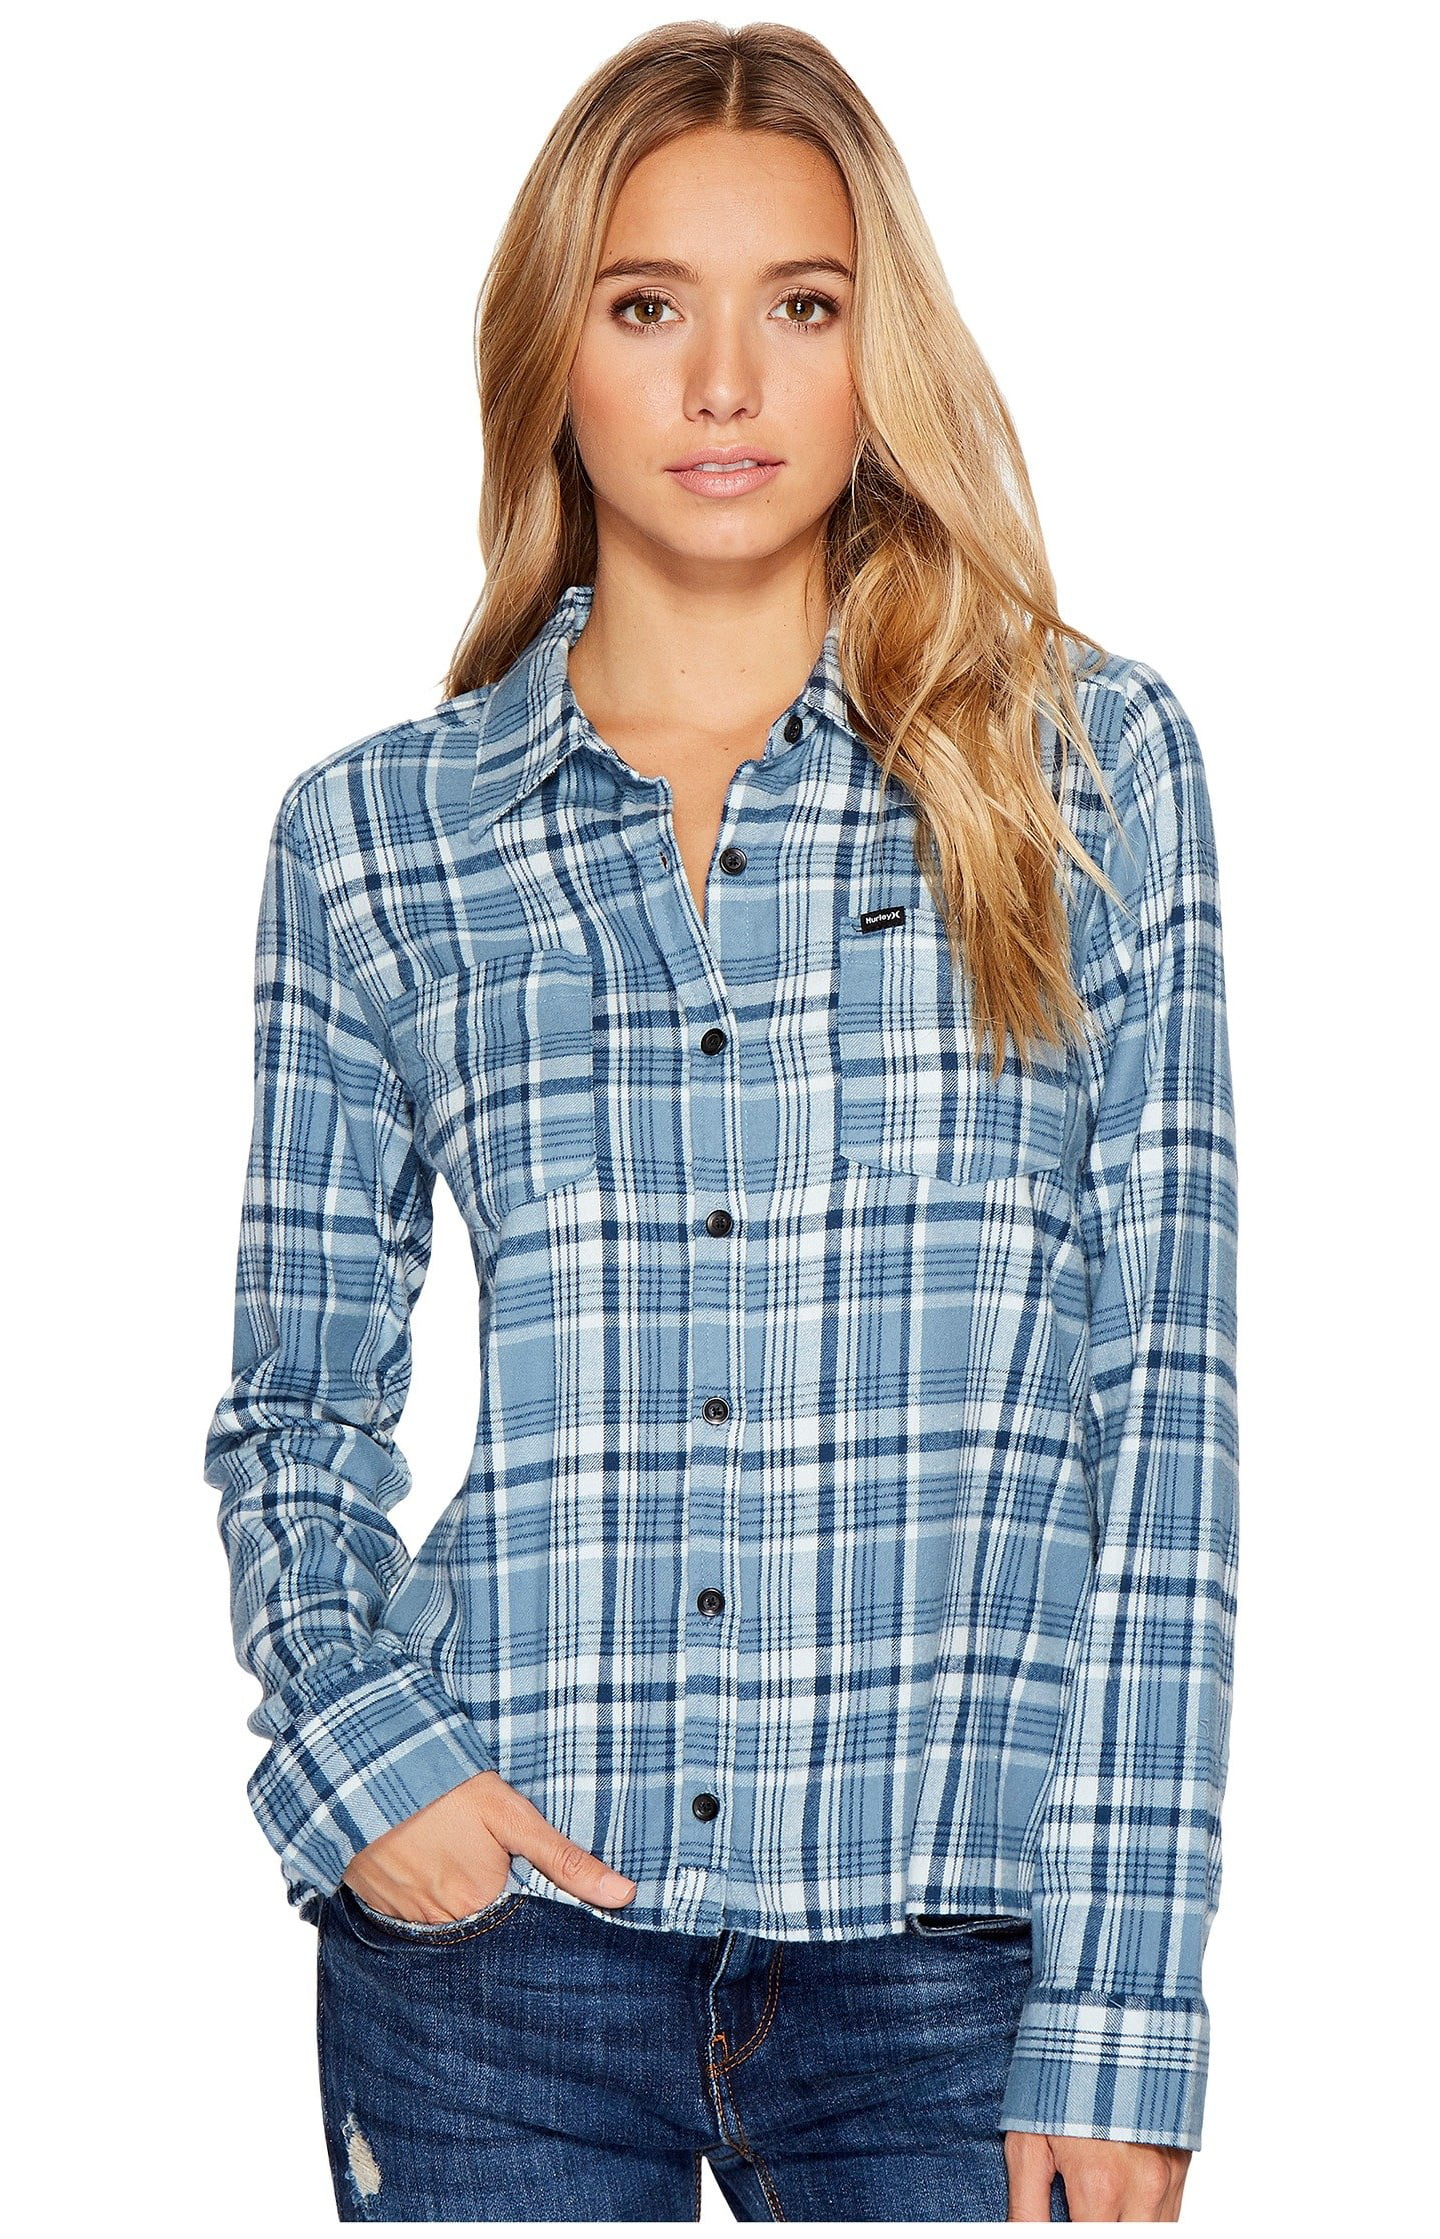 Hurley Womens Plaid Collared Long Sleeve Button Down Shirt